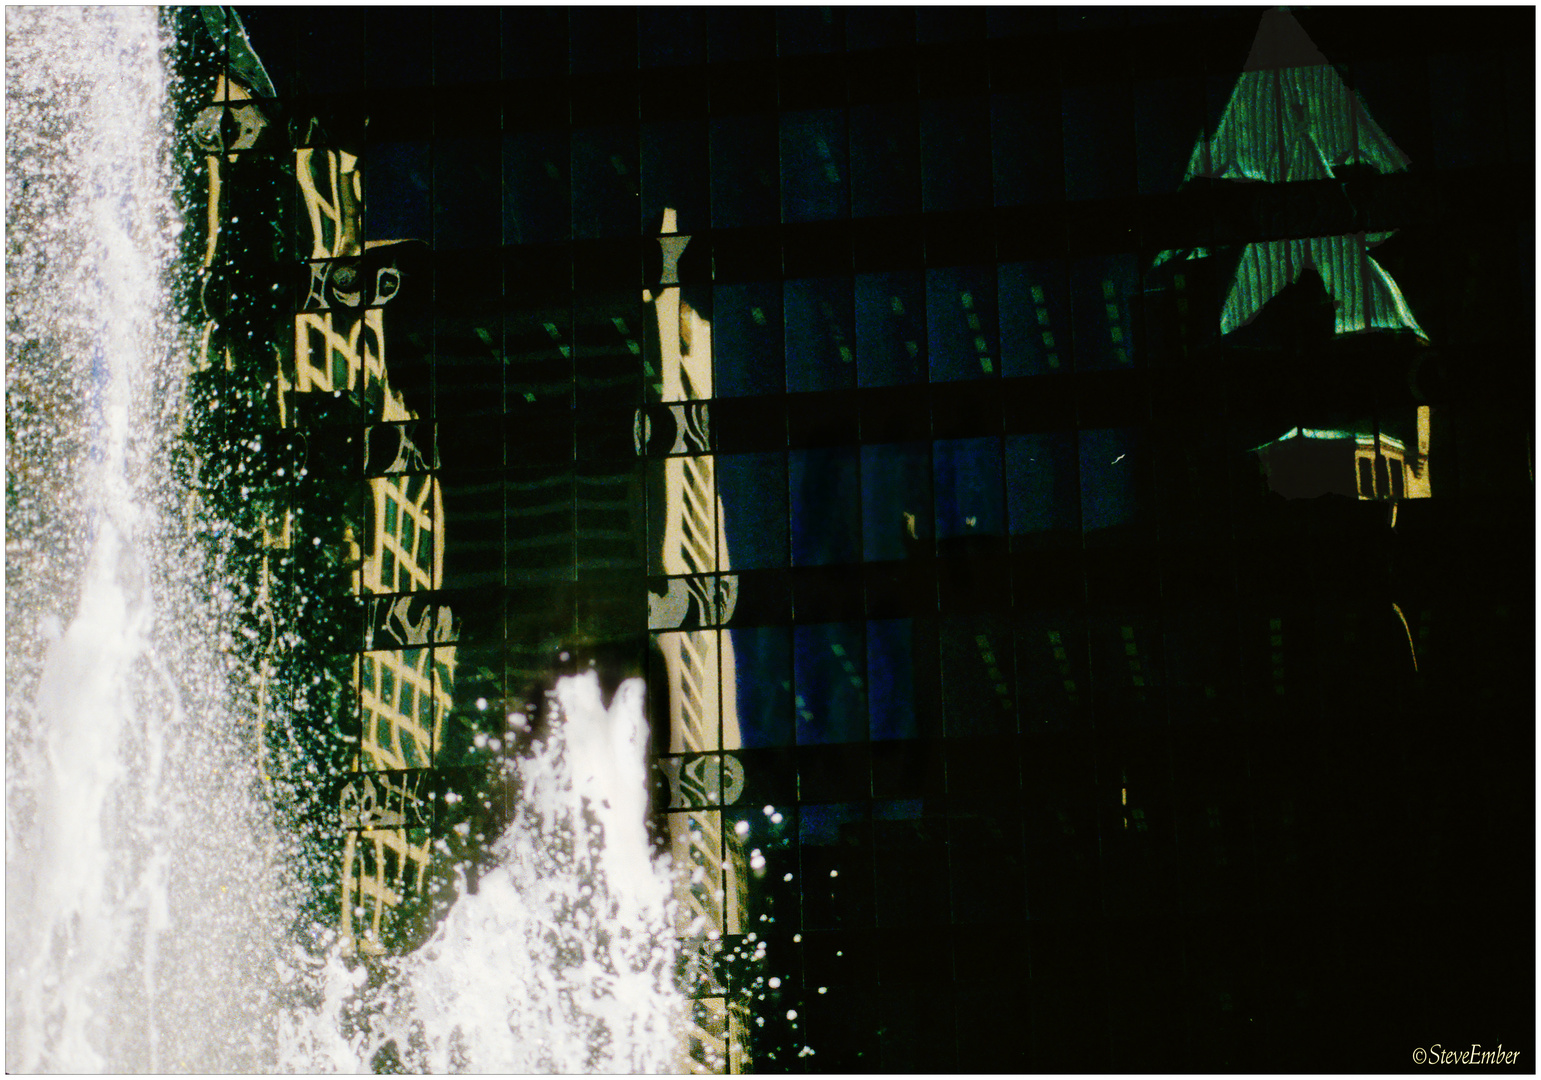 Vancouver Impression No.1 - Centennial Fountain and Reflections in a Glass Wall